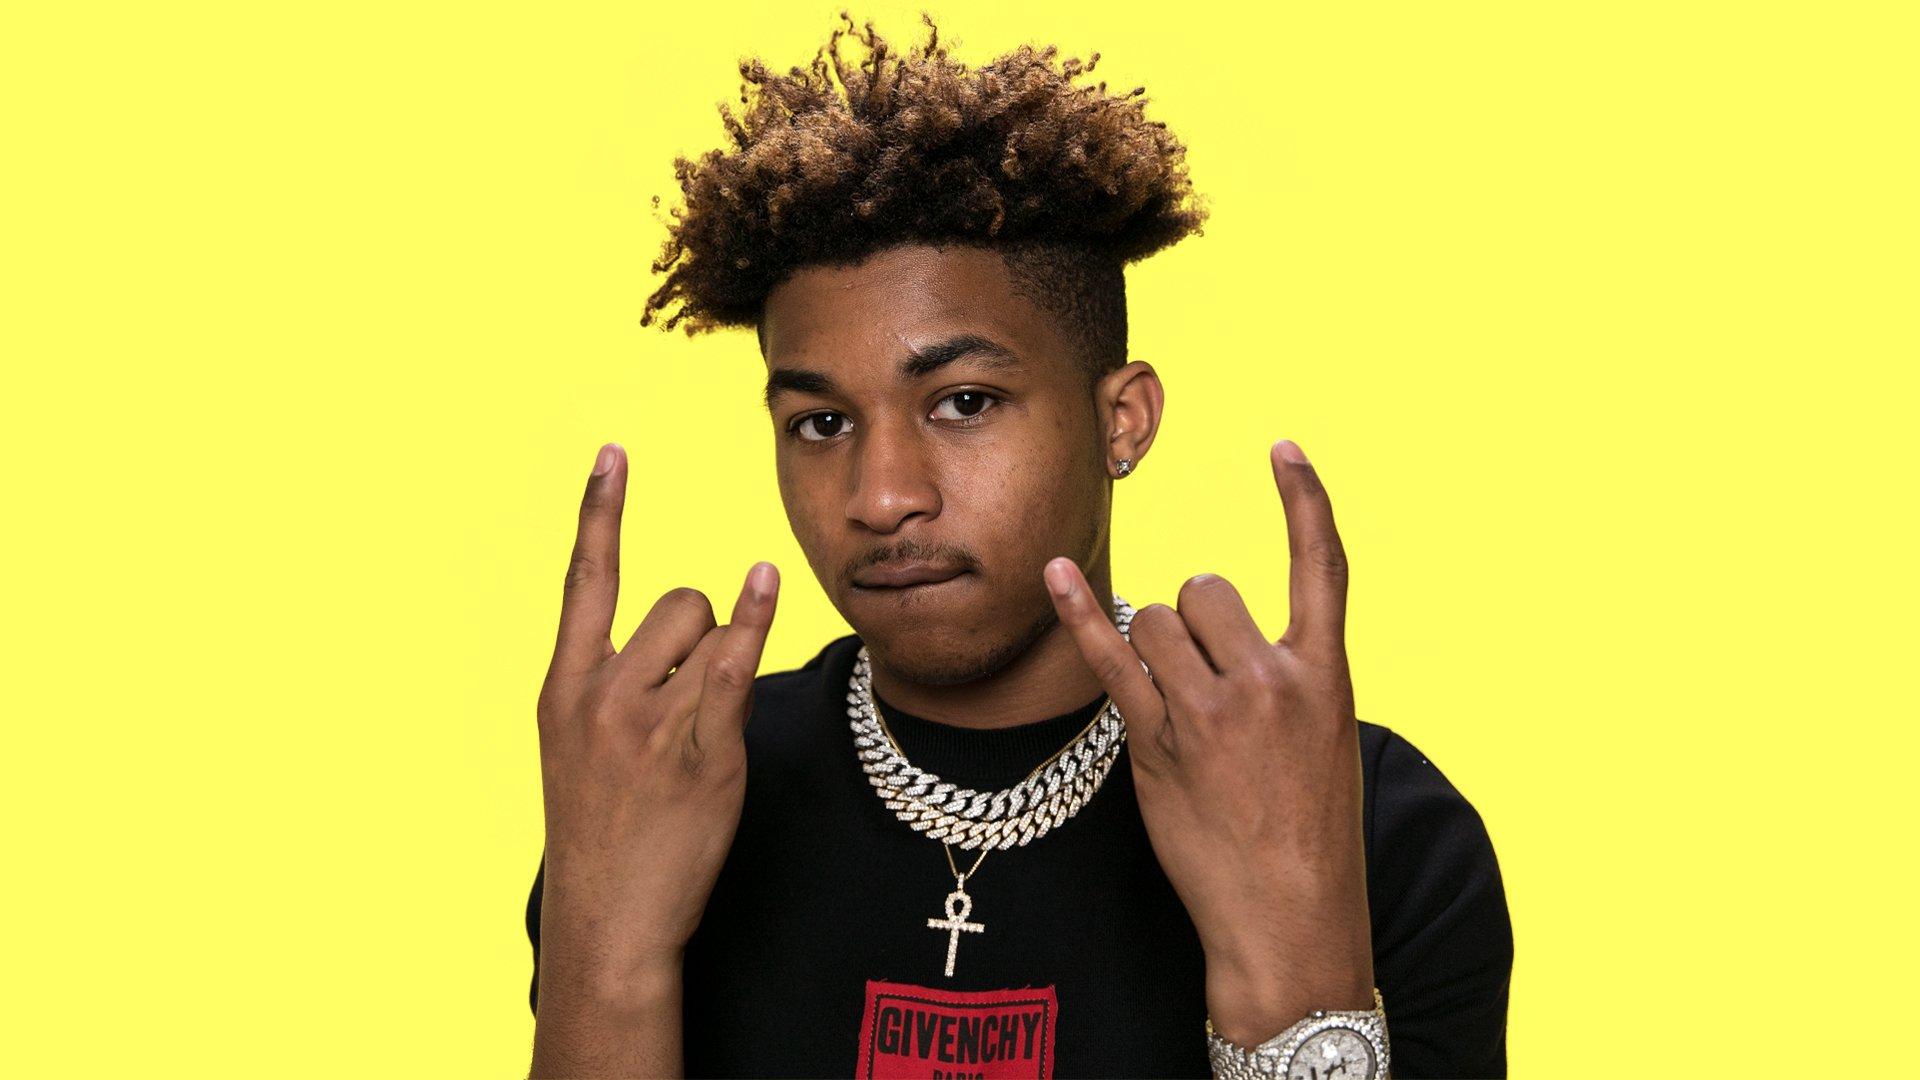 Yellow Rapper Wallpapers